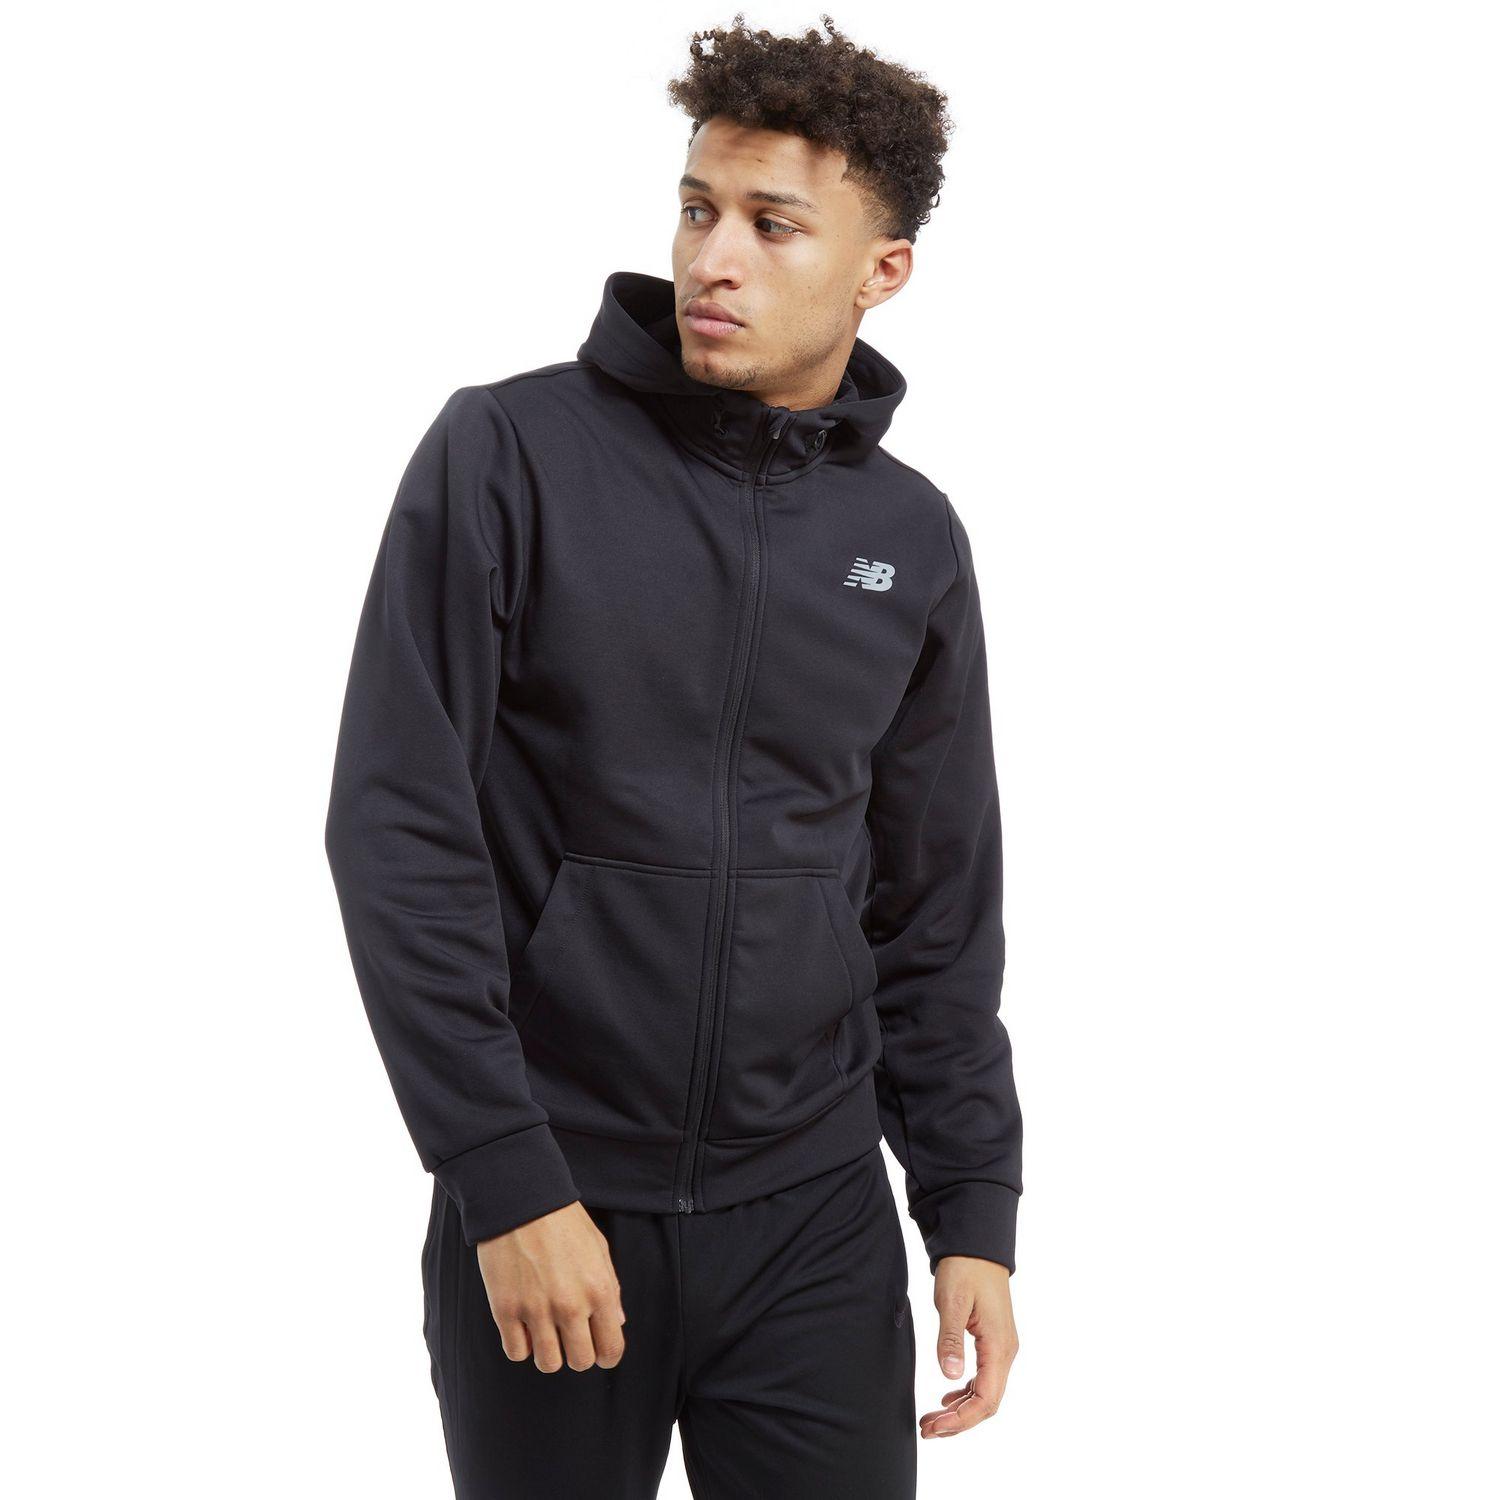 New Balance Synthetic Core Full Zip Poly Hoodie in Black for Men - Lyst